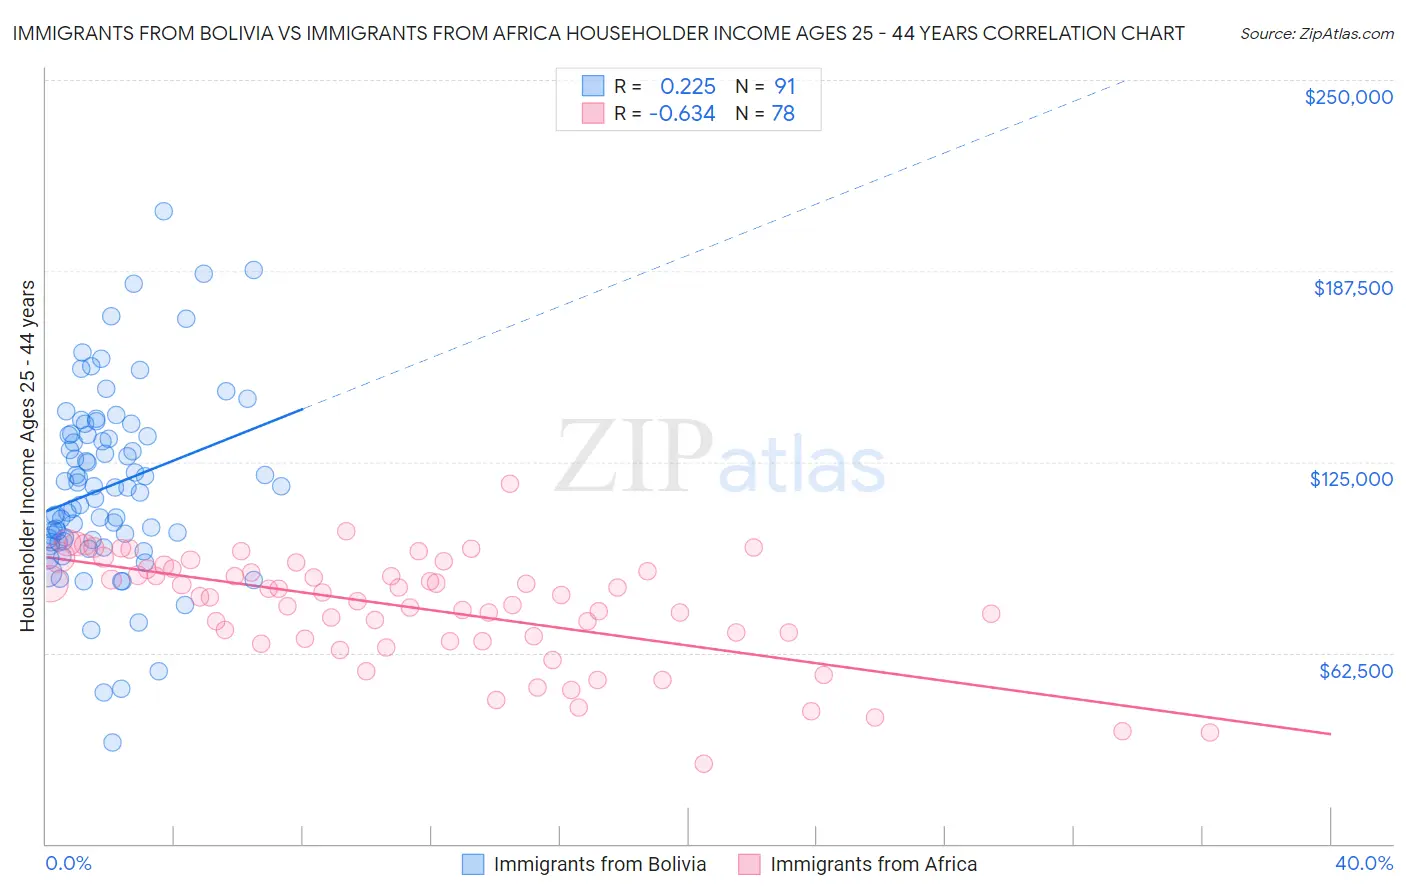 Immigrants from Bolivia vs Immigrants from Africa Householder Income Ages 25 - 44 years